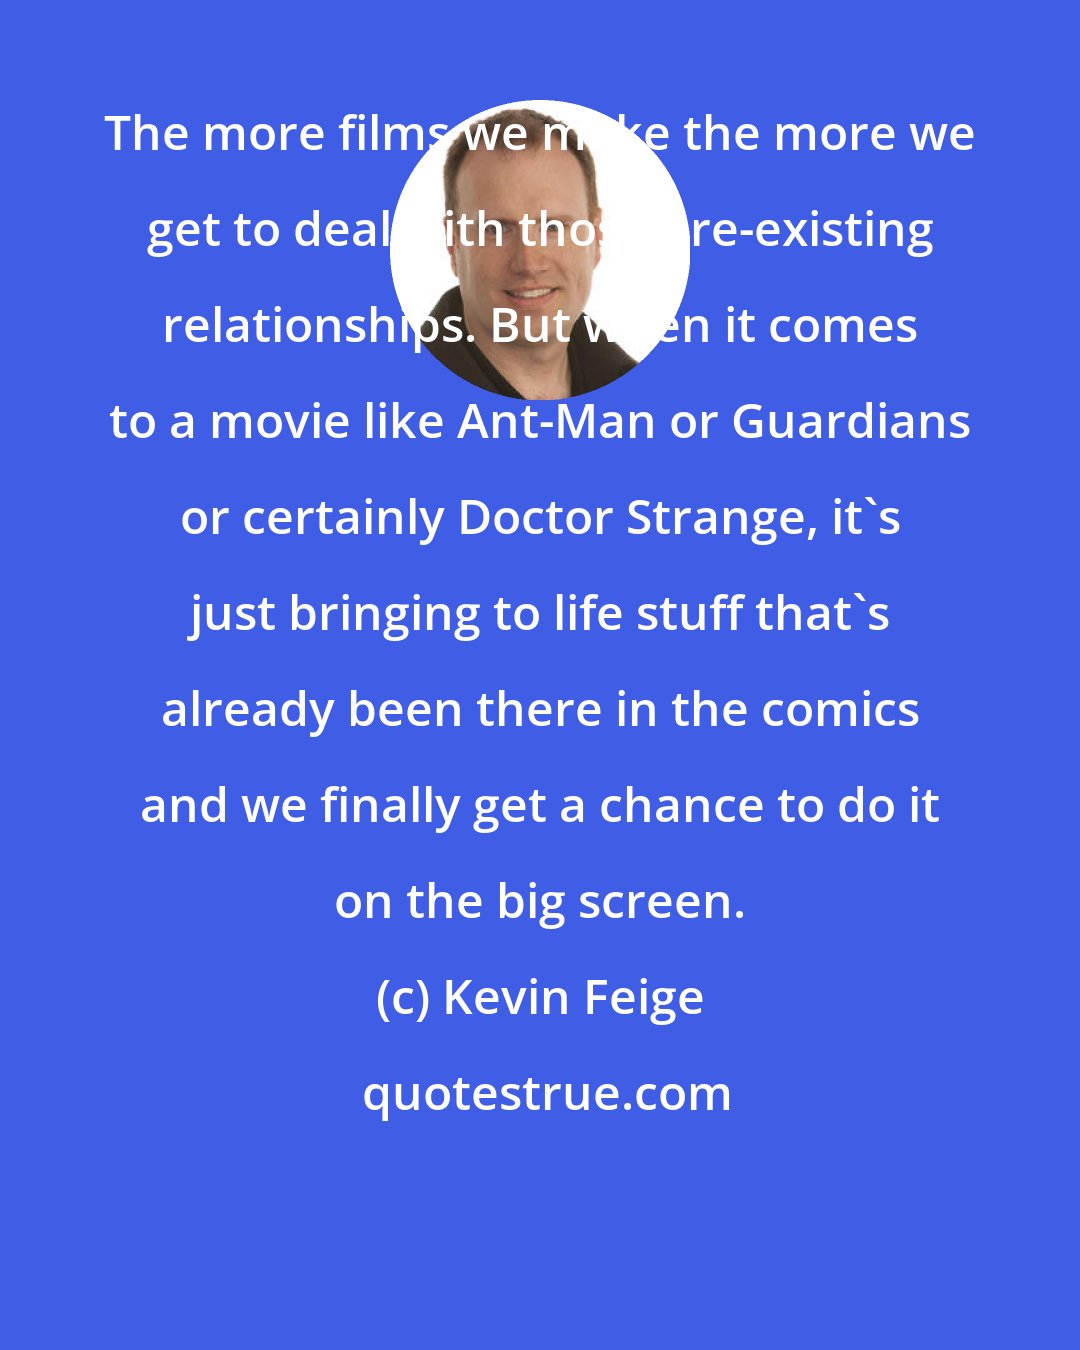 Kevin Feige: The more films we make the more we get to deal with those pre-existing relationships. But when it comes to a movie like Ant-Man or Guardians or certainly Doctor Strange, it's just bringing to life stuff that's already been there in the comics and we finally get a chance to do it on the big screen.